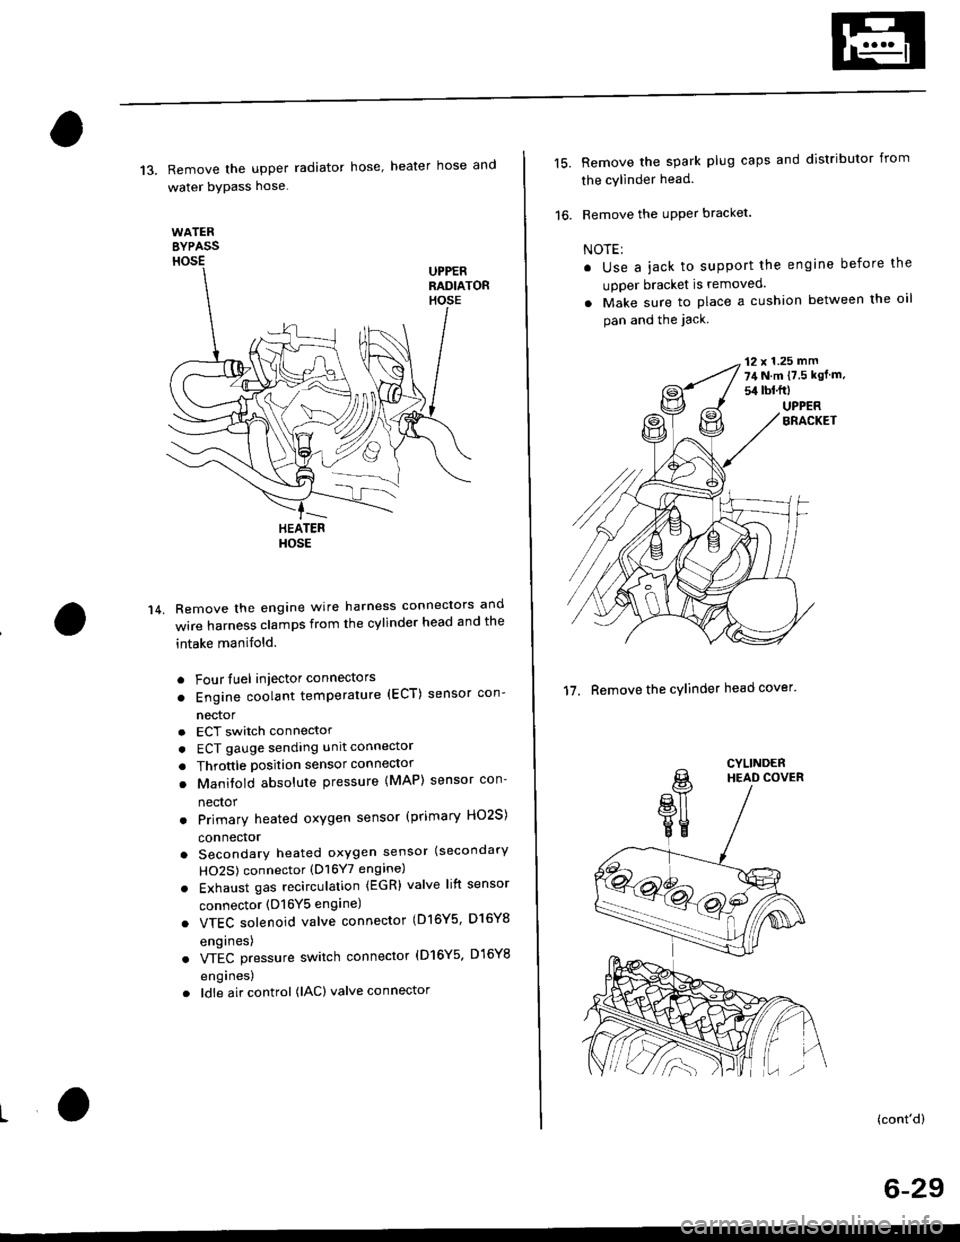 HONDA CIVIC 1996 6.G Workshop Manual 13. Remove the upper radiator hose heater hose and
water bYPass hose
WATEREYPASSHOSEUPPERRADIATORHOSE
14.
HEATERHOSE
Remove the engine wire harness connectors and
wire harness clamps from the cylinde